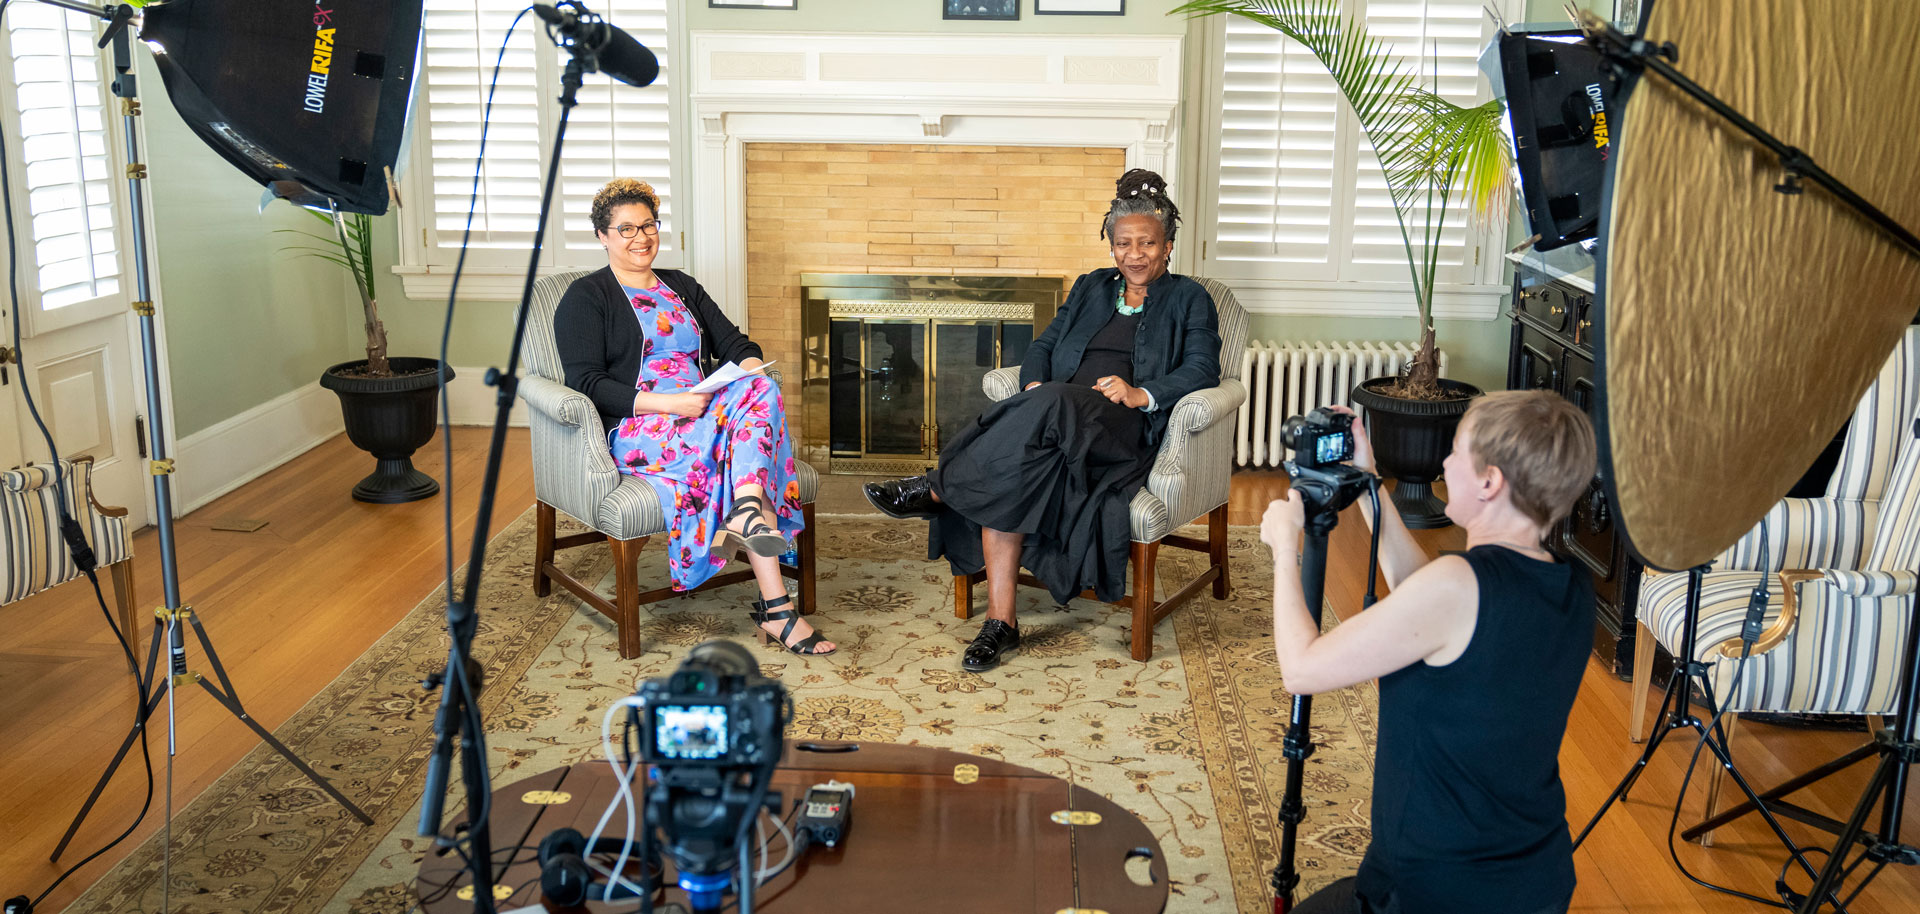 Professor Peony Fhagen and Board of Trustees member Frieda Ekotto on Saturday, April 9, 2022 in Tutt Alumni House about to be filmed by videographer Julia Fuller. Photo by Lonnie Timmons III / Colorado College.